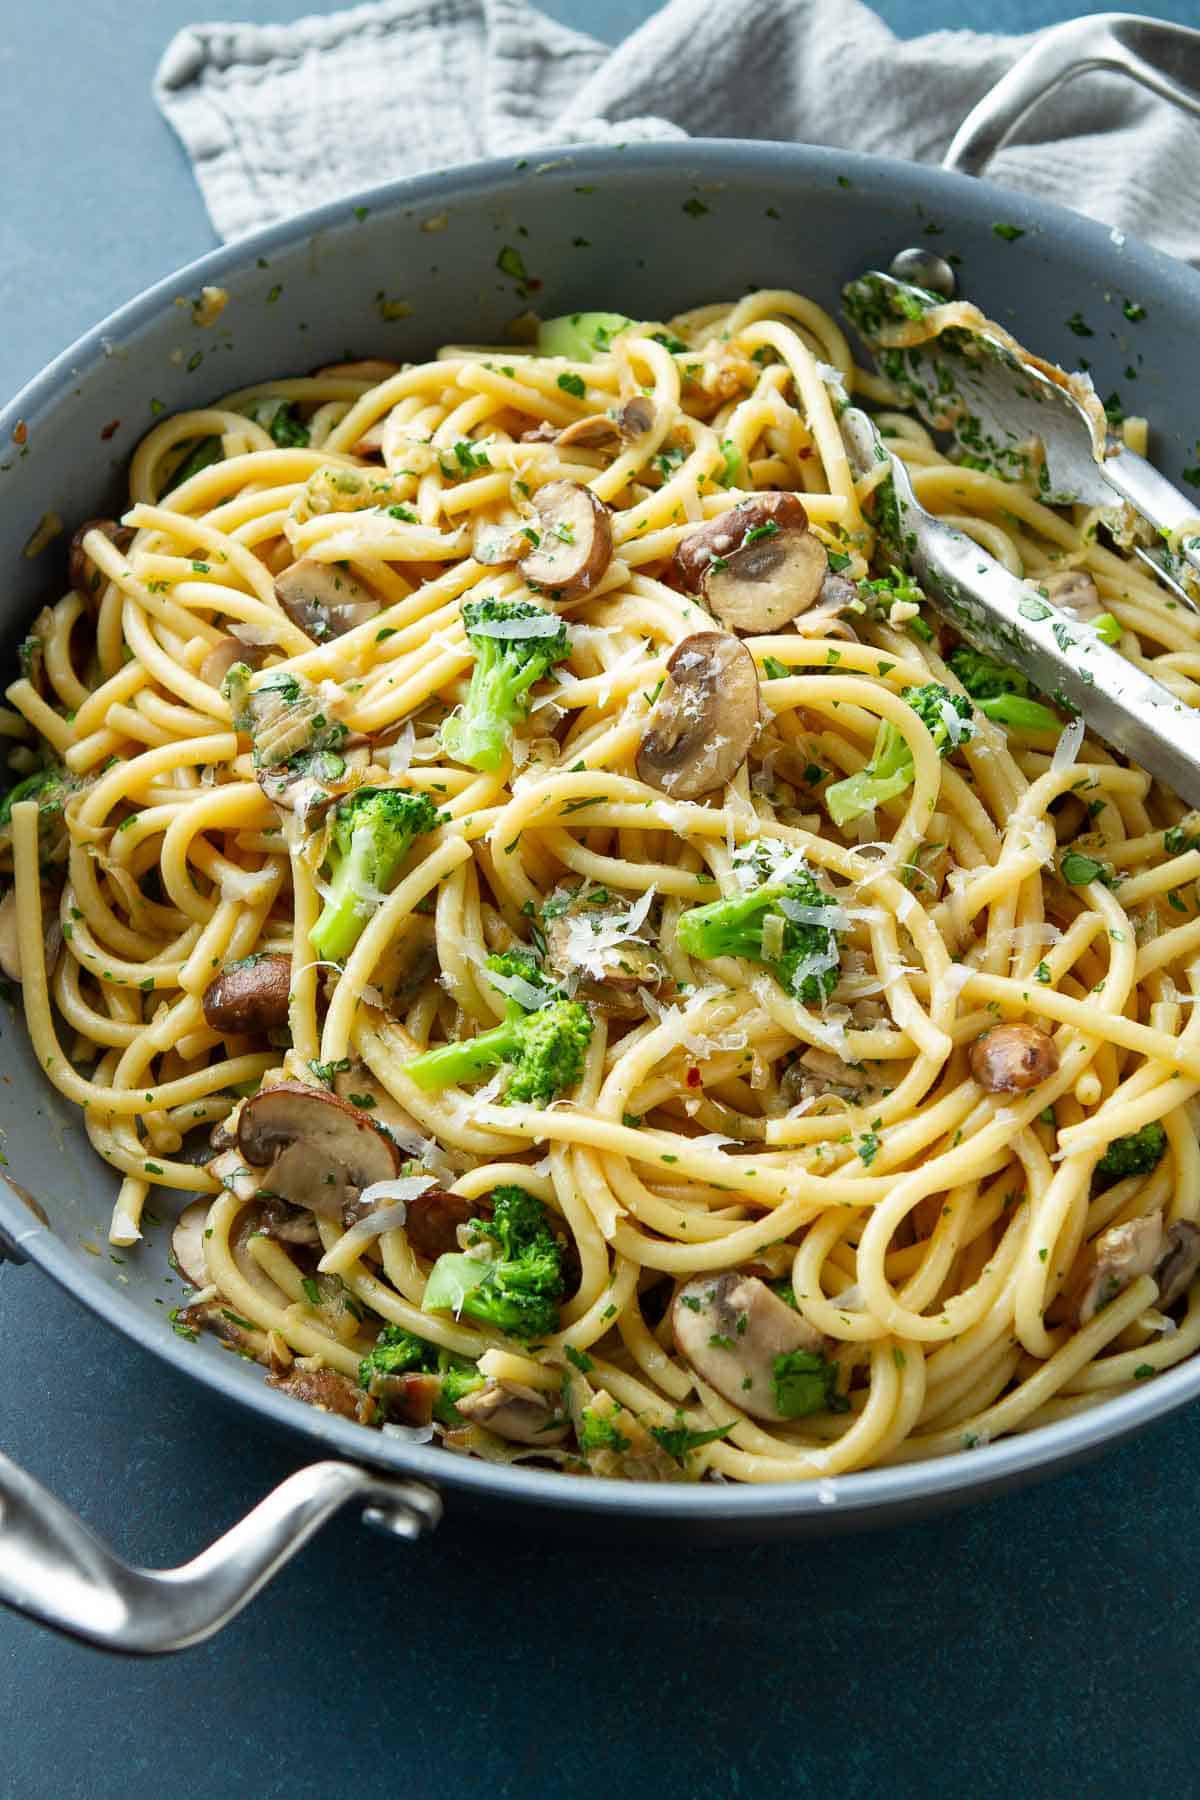 Nonstick skillet filled with noodles, broccoli and mushrooms.